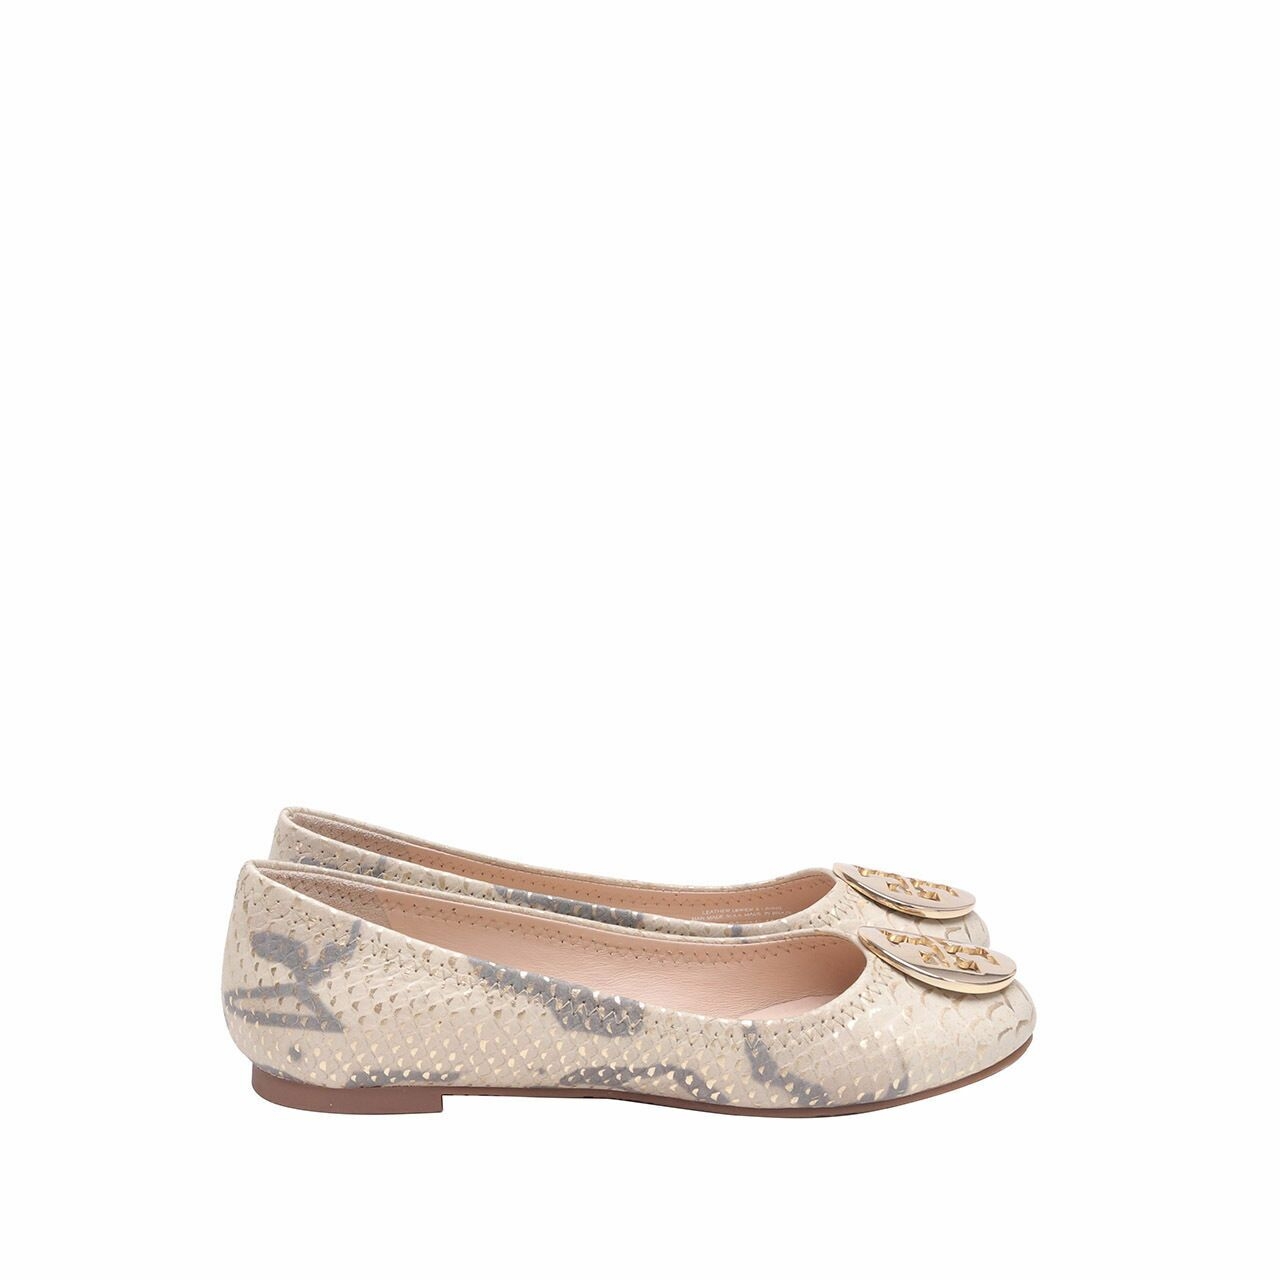 Tory Burch Multi Embossed Leather Flats